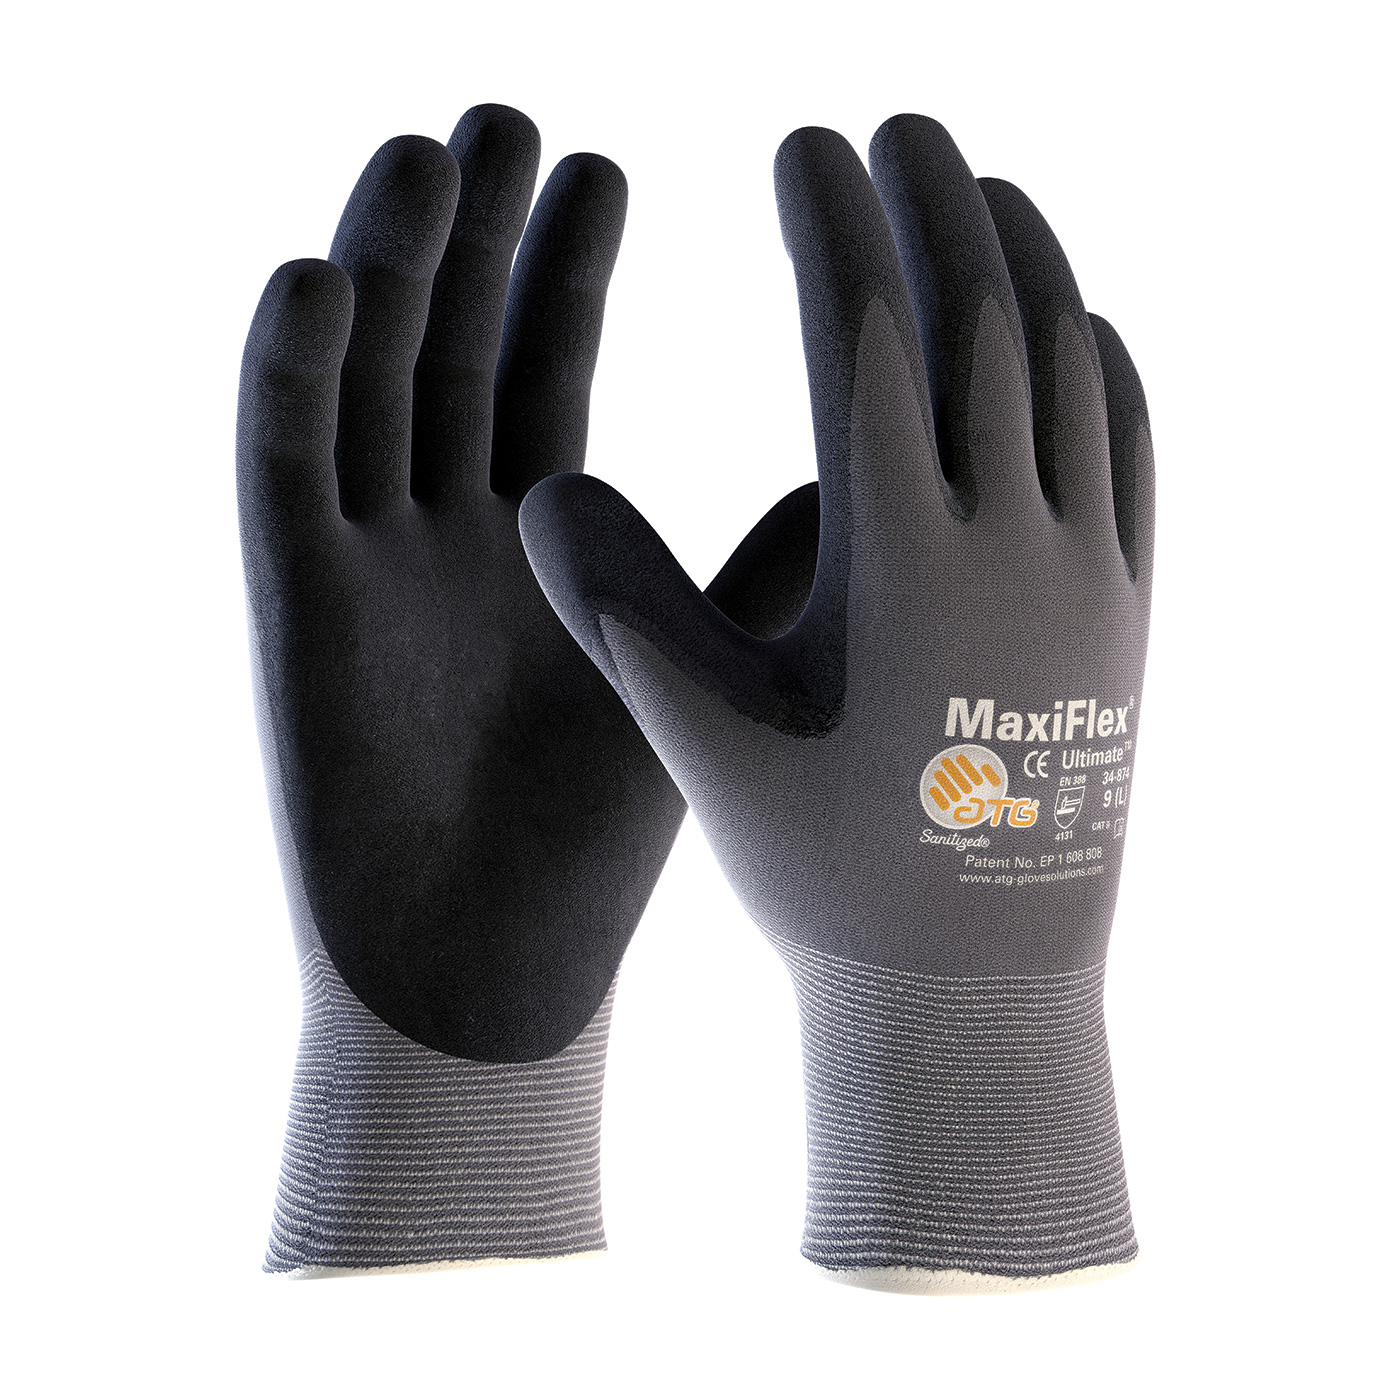 PIP 34-874/XL MaxiFlex Ultimate Seamless Knit Nylon/Lycra Glove with Nitrile Coated MicroFoam Grip on Palm & Fingers - X-Large PID-34 874 XL